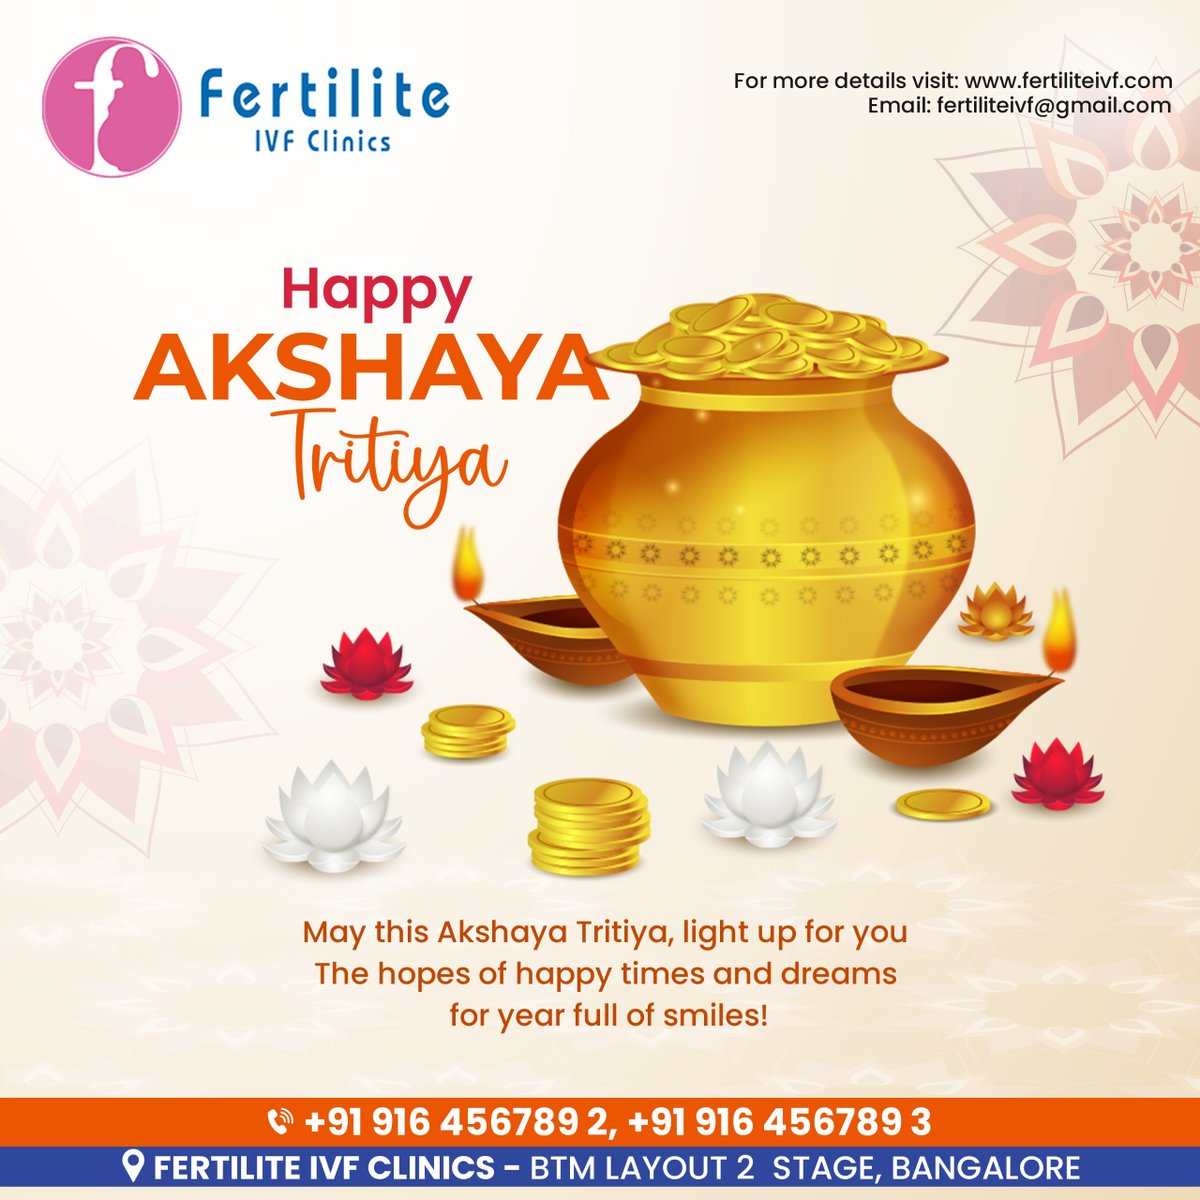 ✨ Happy Akshaya Tritiya from Fertilite IVF Clinics! ✨

🌟 May this auspicious occasion bring forth a year filled with hope, joy, and the promise of dreams fulfilled!

Contact us at +91 916 4567892 or email fertiliteivf@gmail.com.

 #AkshayaTritiya #FertiliteIVF #Bangalore